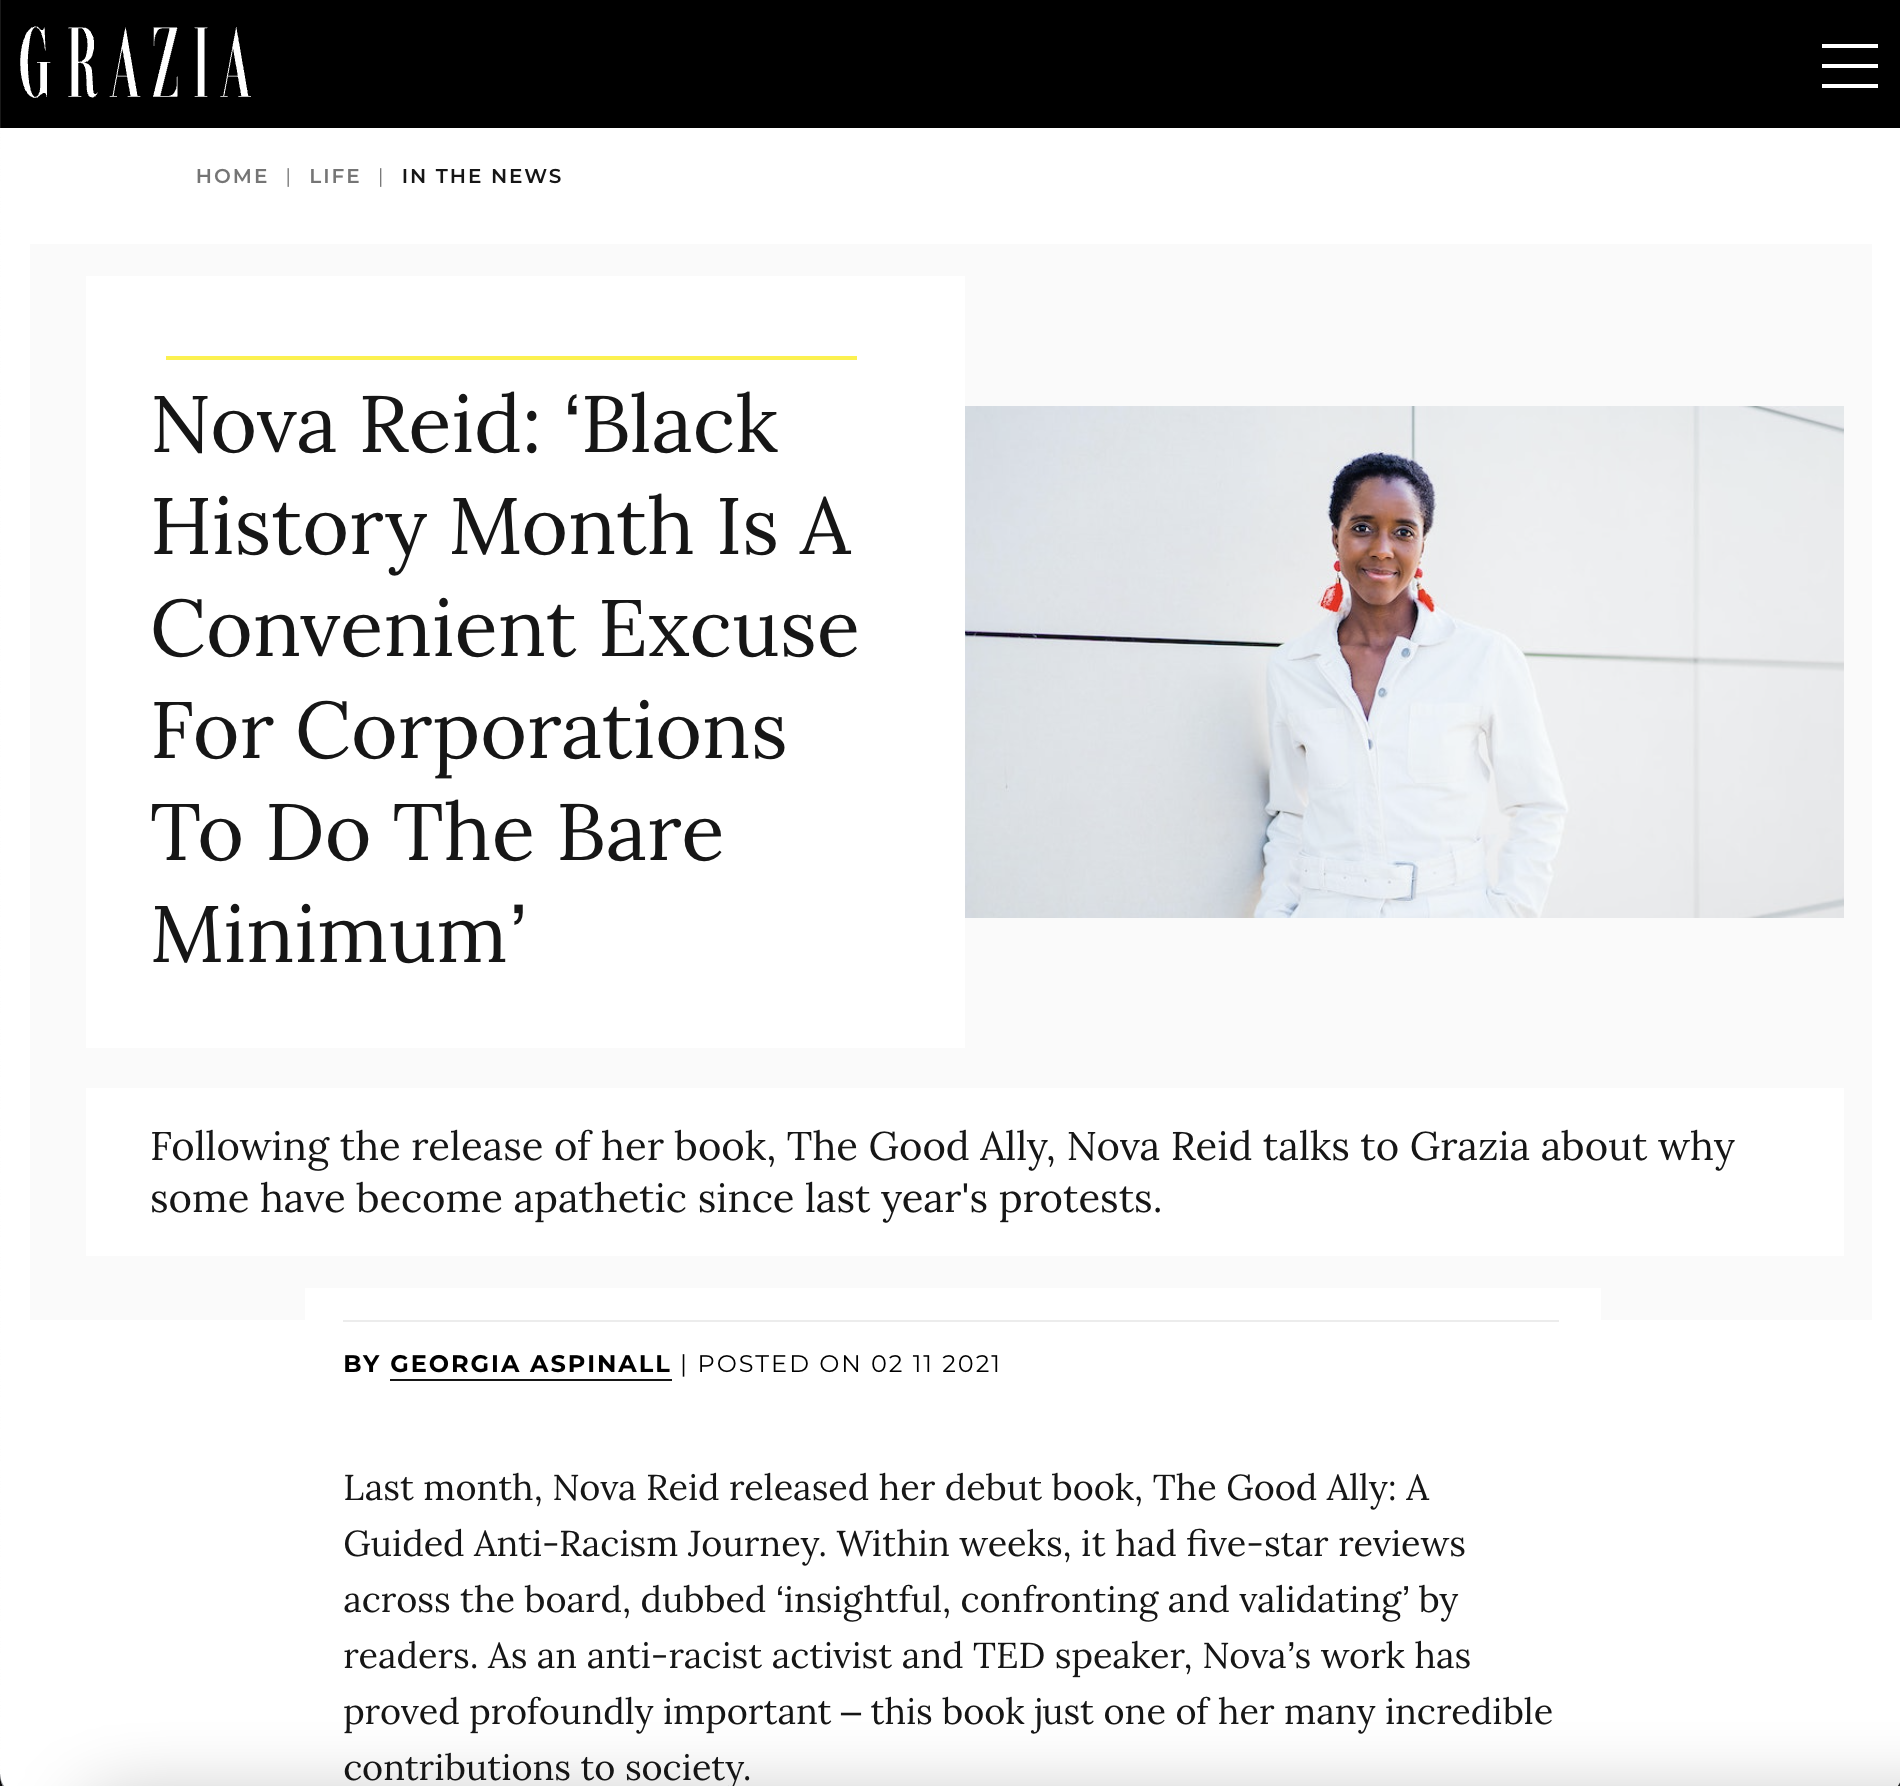 An interview in Grazia magazine discussing how to avoid tokenism in the workplace during black history month